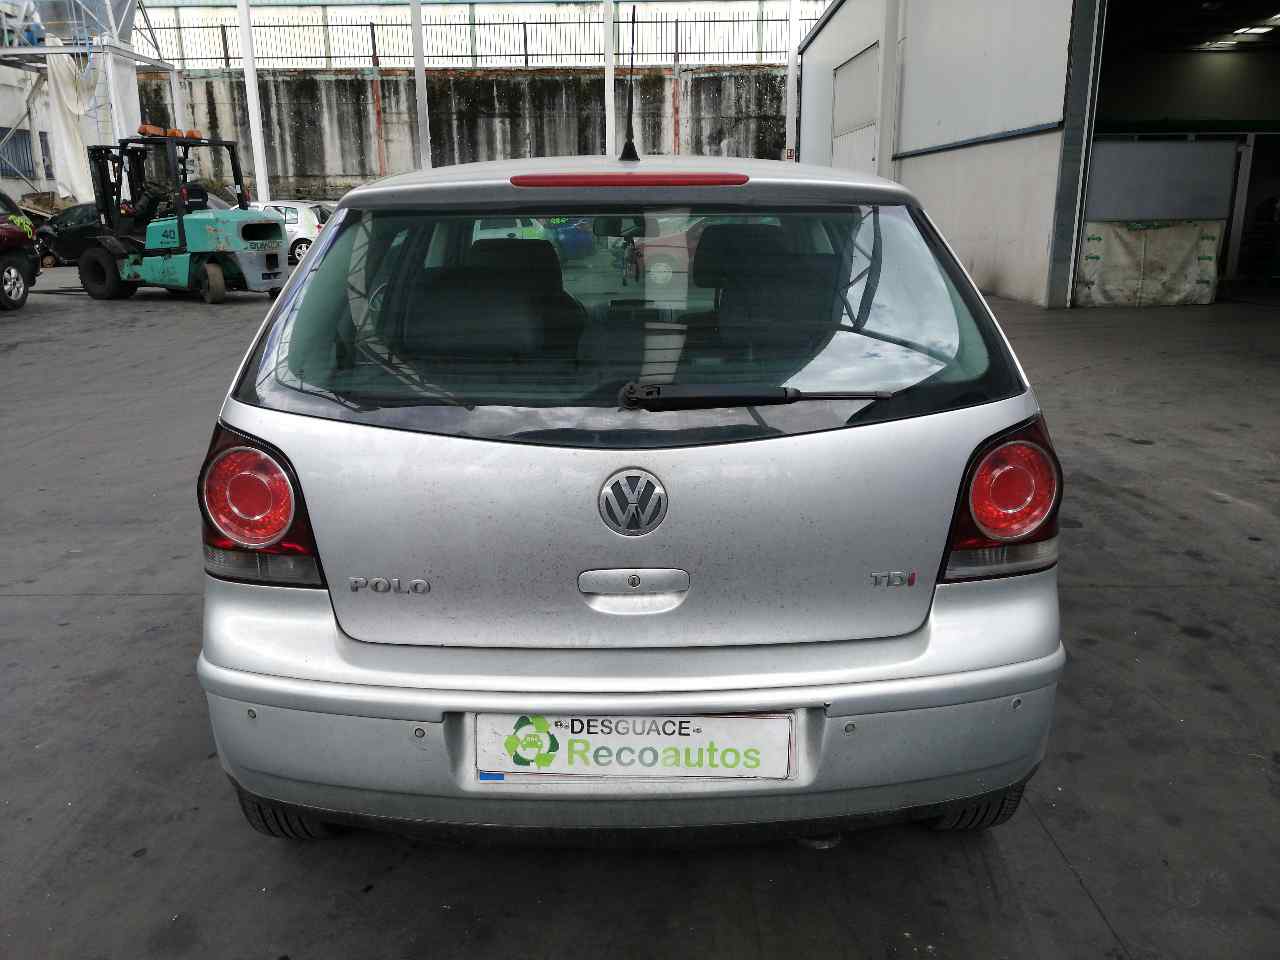 VOLKSWAGEN Polo 4 generation (2001-2009) Other Body Parts 6Q1721503B, 6PV00849501, HELLA 19918772